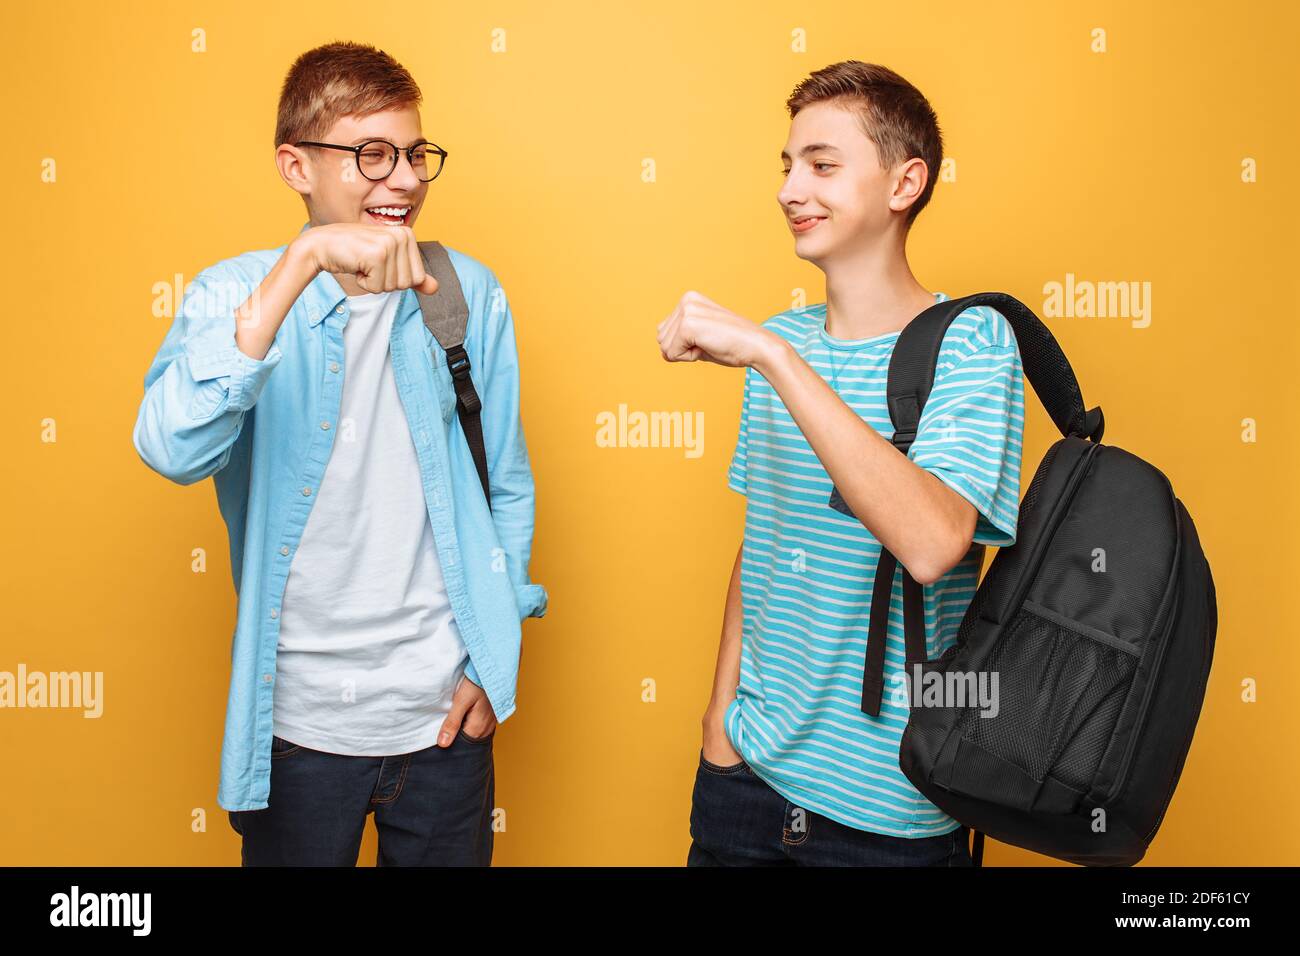 Two stylish teenagers, guys greet each other, on a yellow background Stock Photo